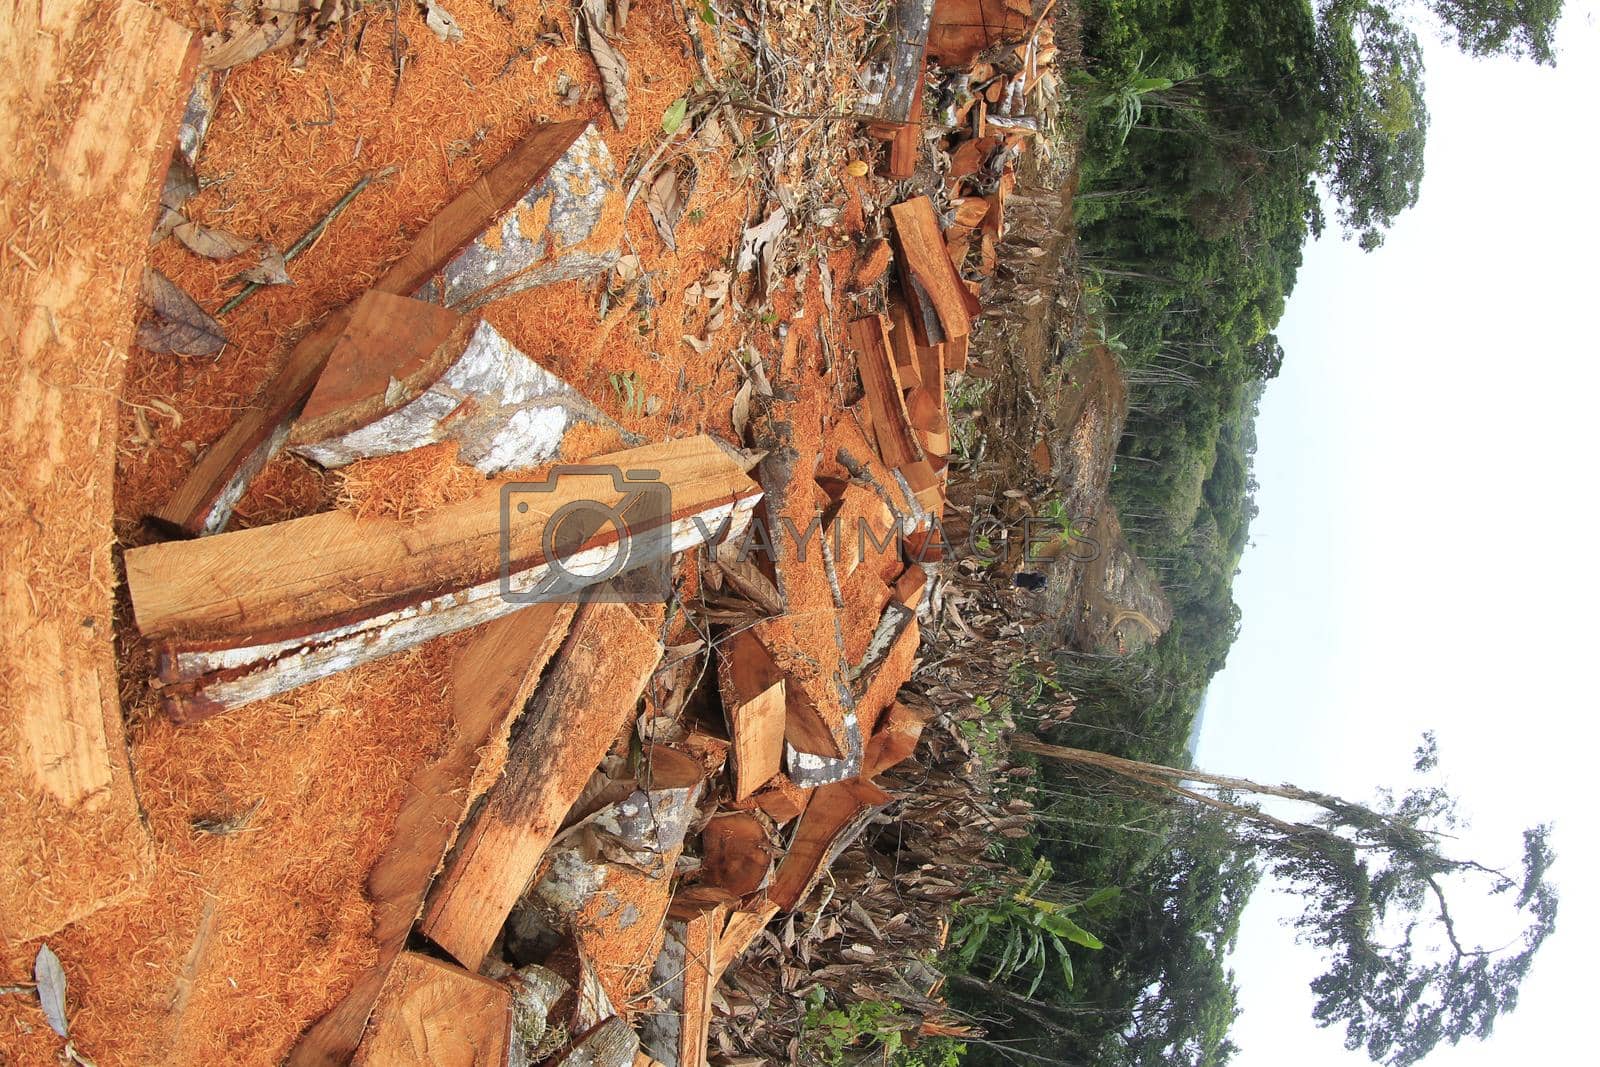 Royalty free image of deforestation in the Atlantic Forest by joasouza